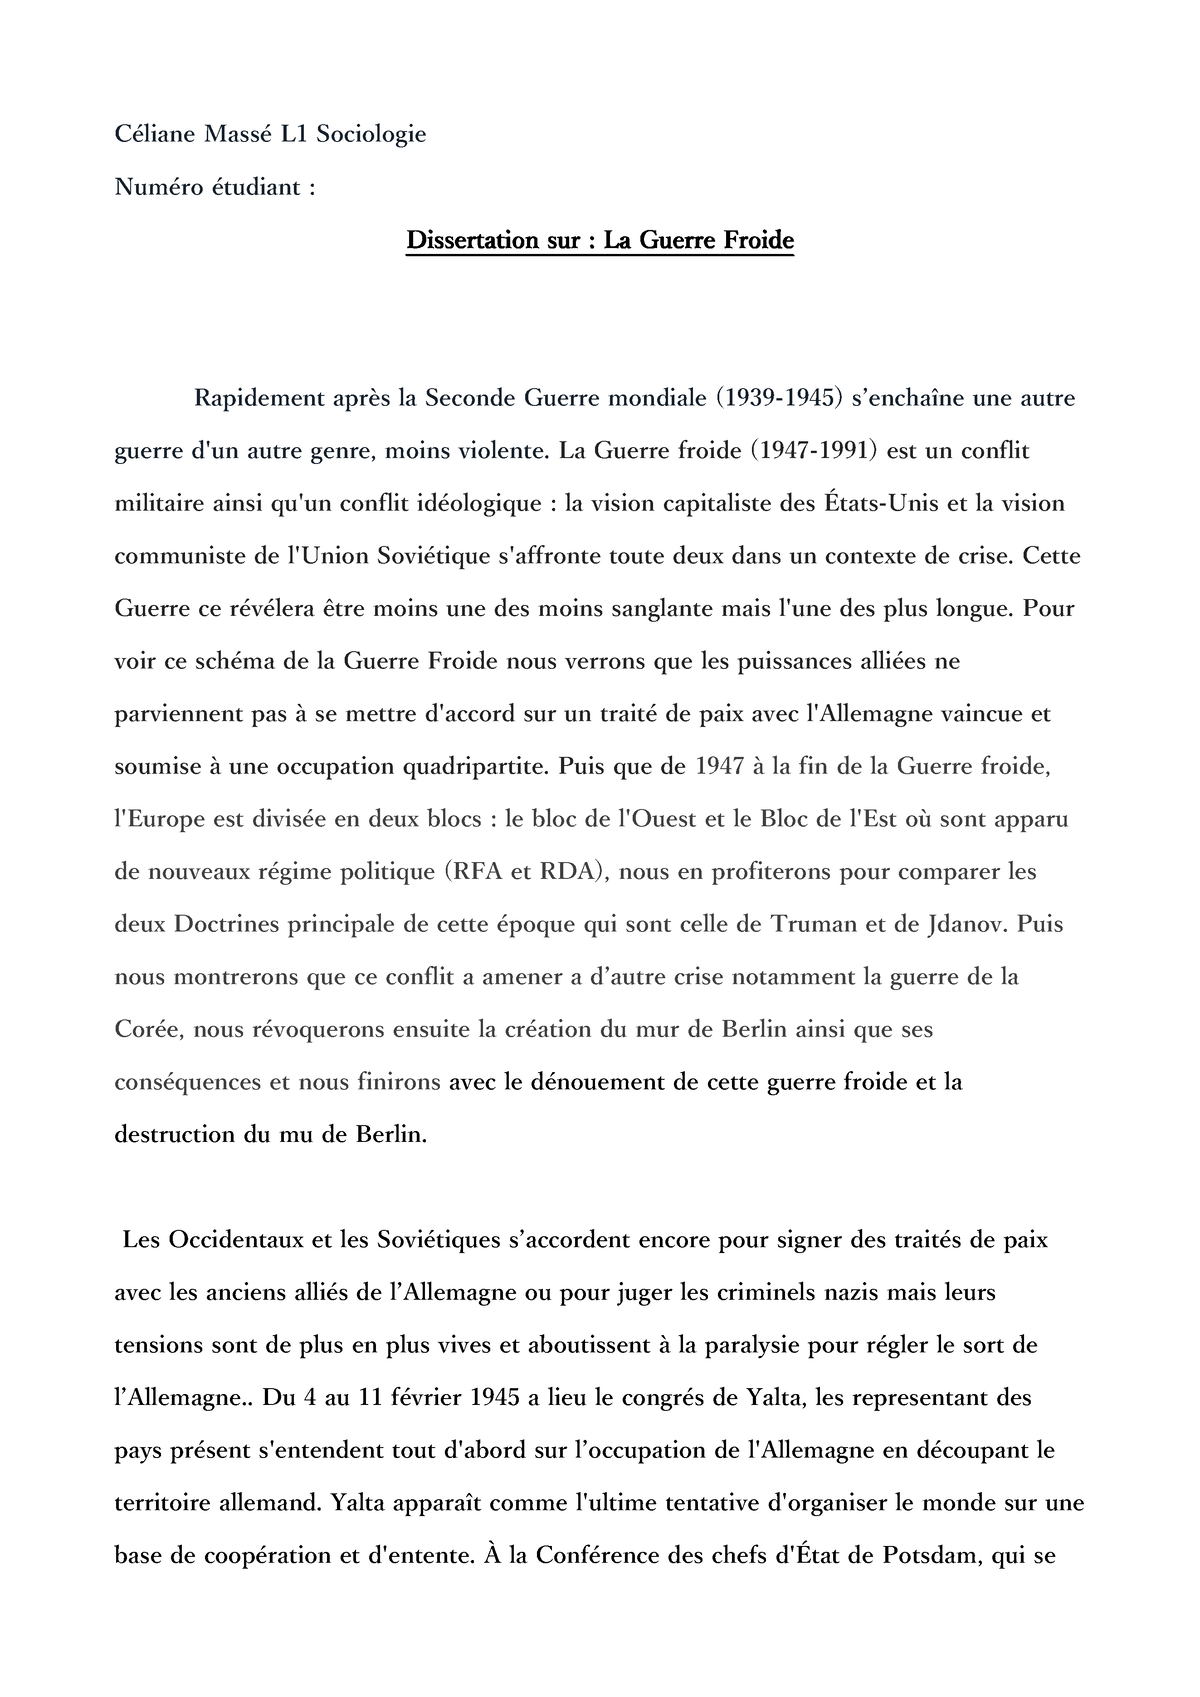 guerre froide introduction dissertation